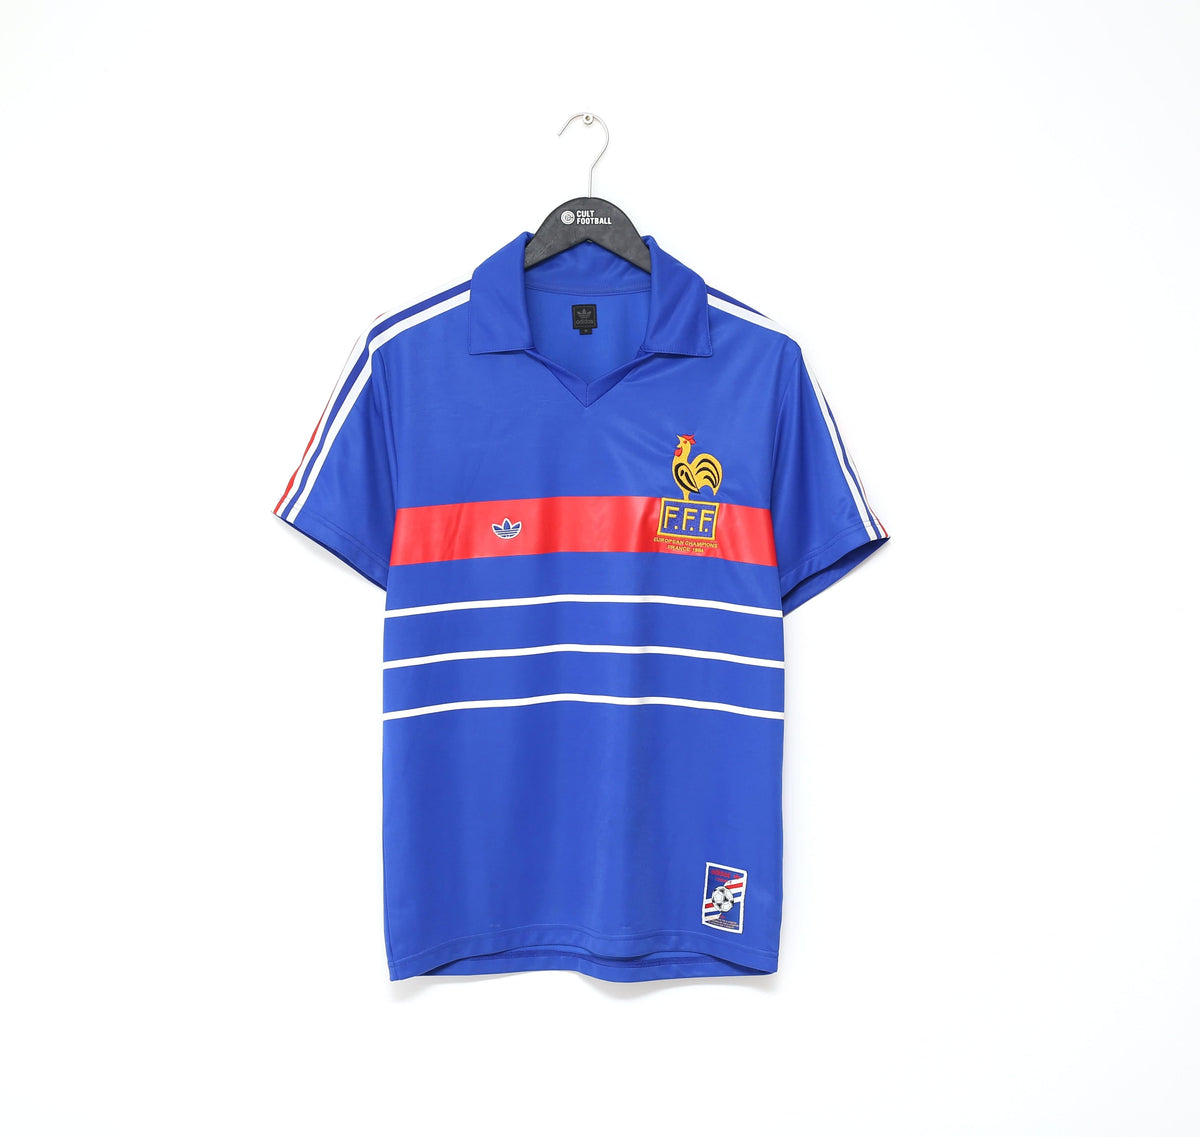 VINTAGE FRANCE RUGBY LEAGUE WORLD CUP SHIRT